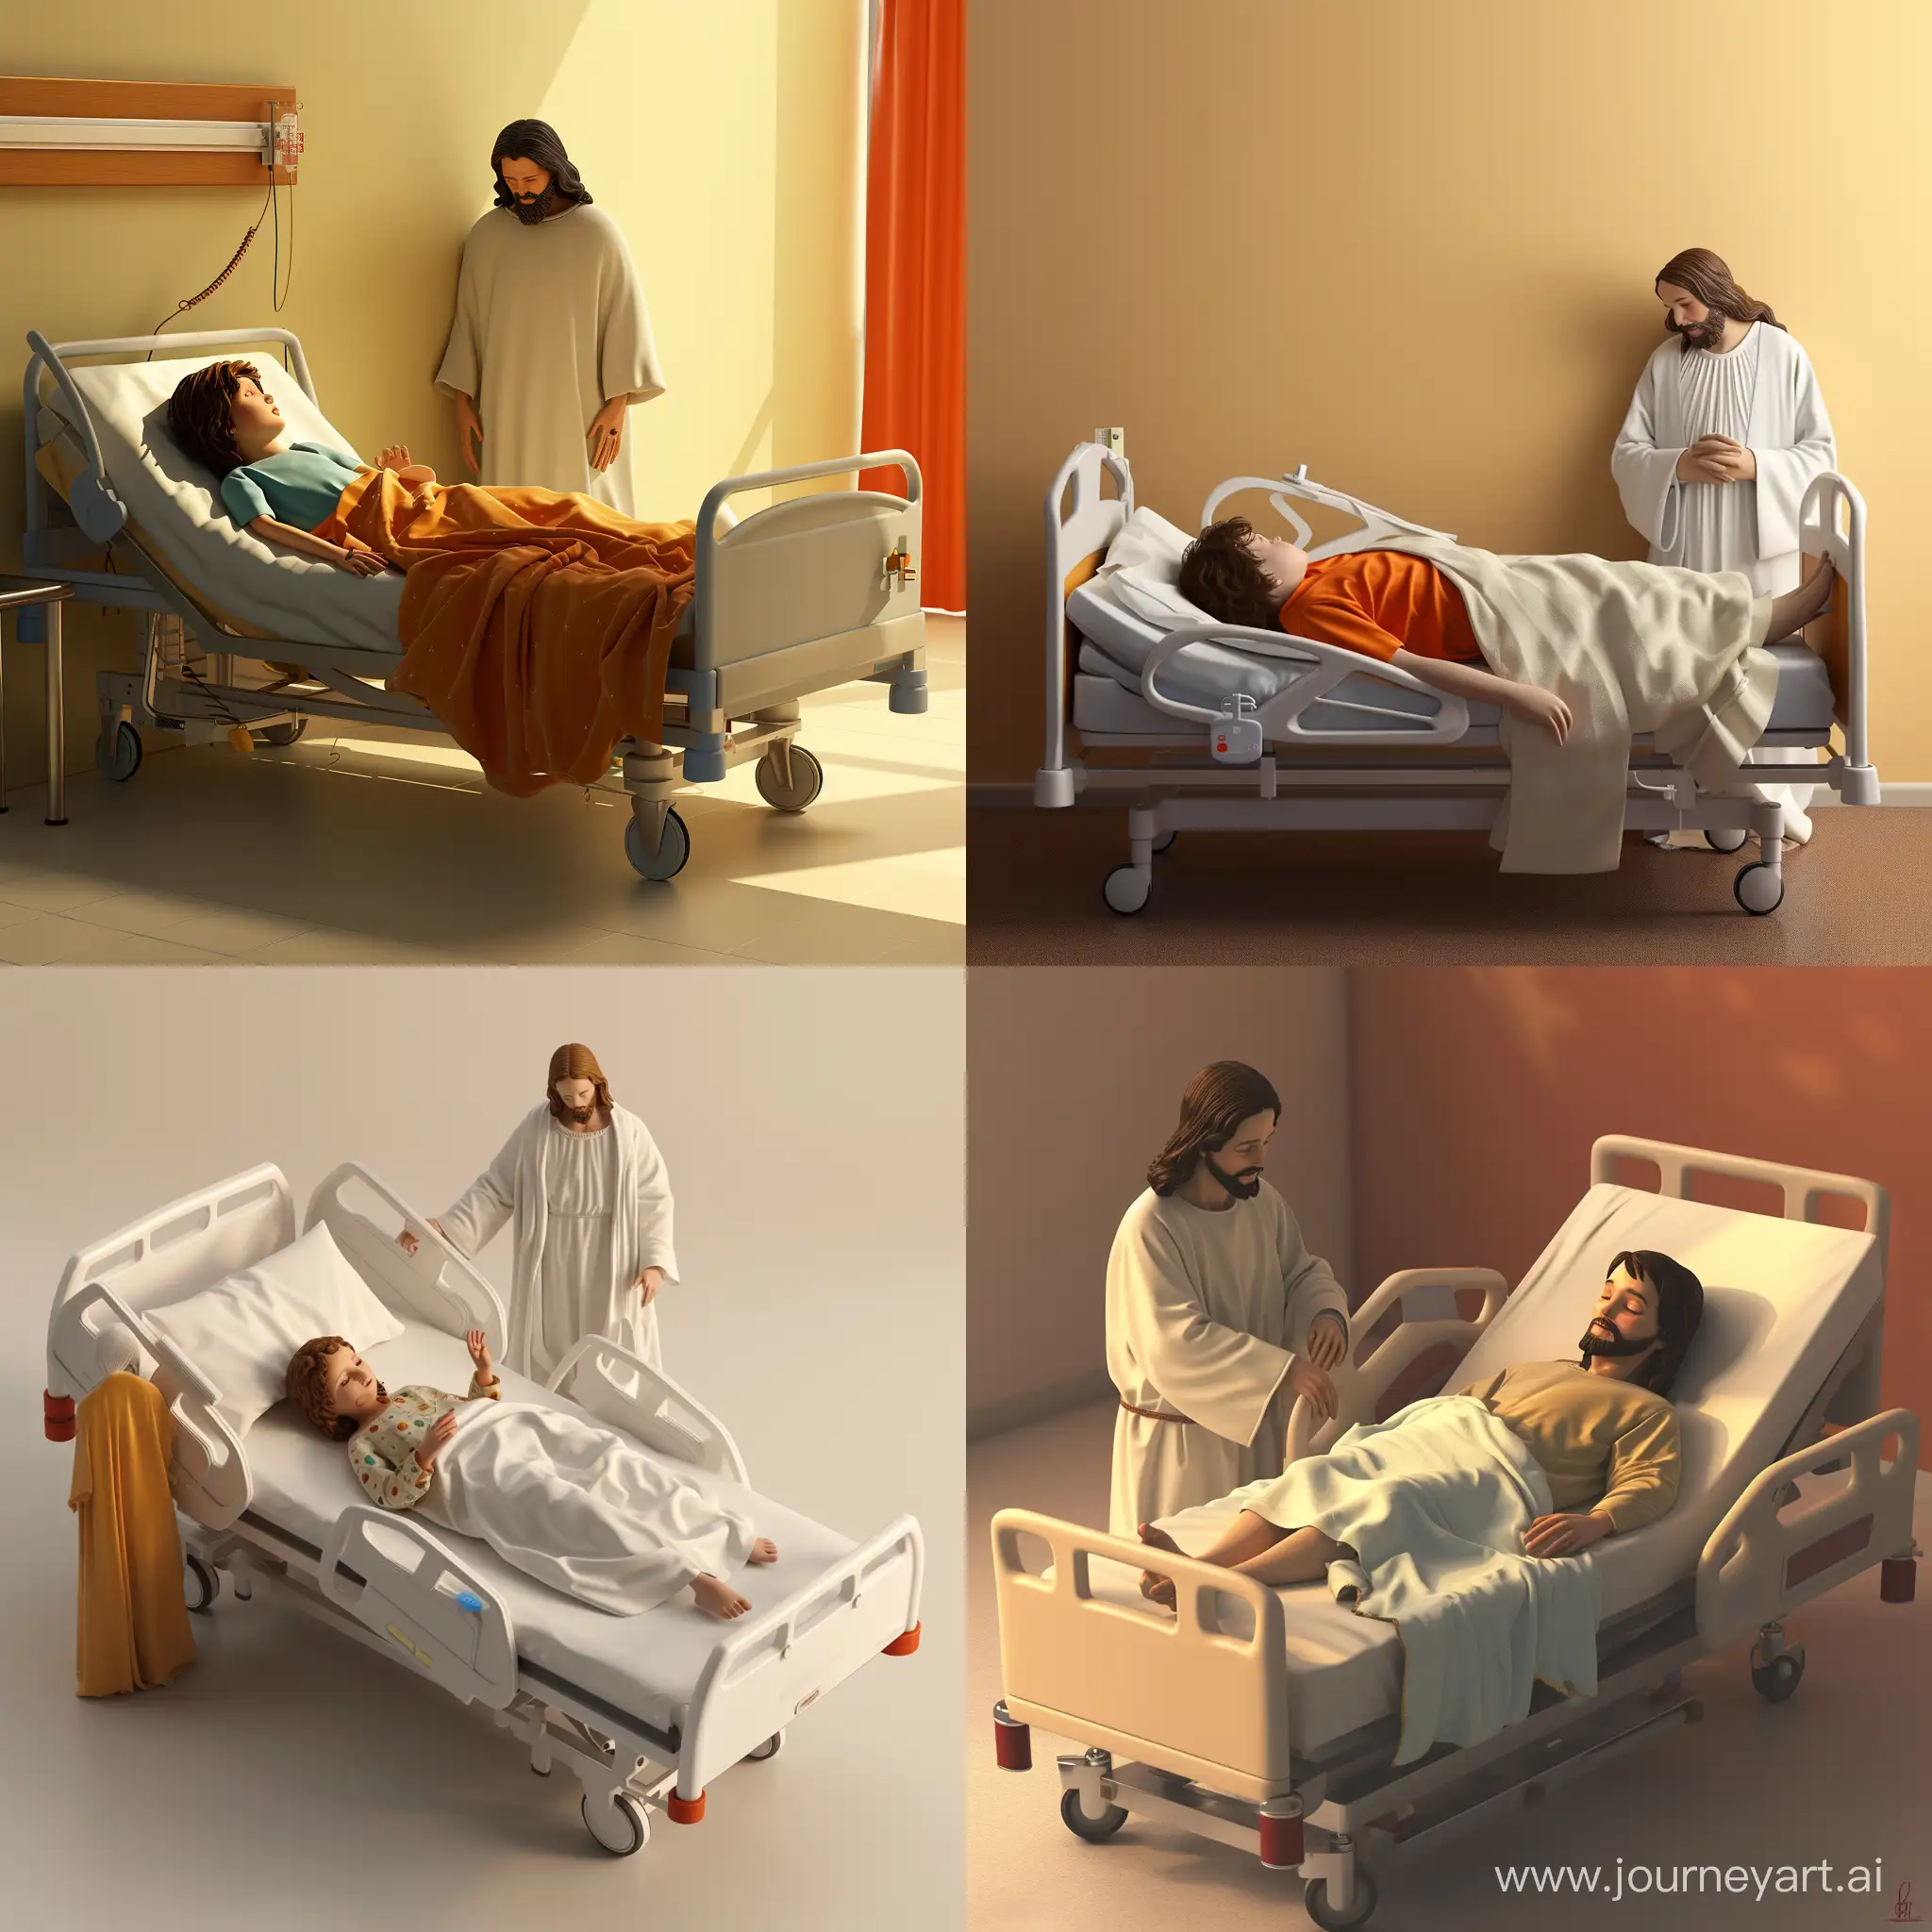 Comforting-Presence-Child-Resting-with-Silent-Guardian-Jesus-in-Warm-Hospital-Room